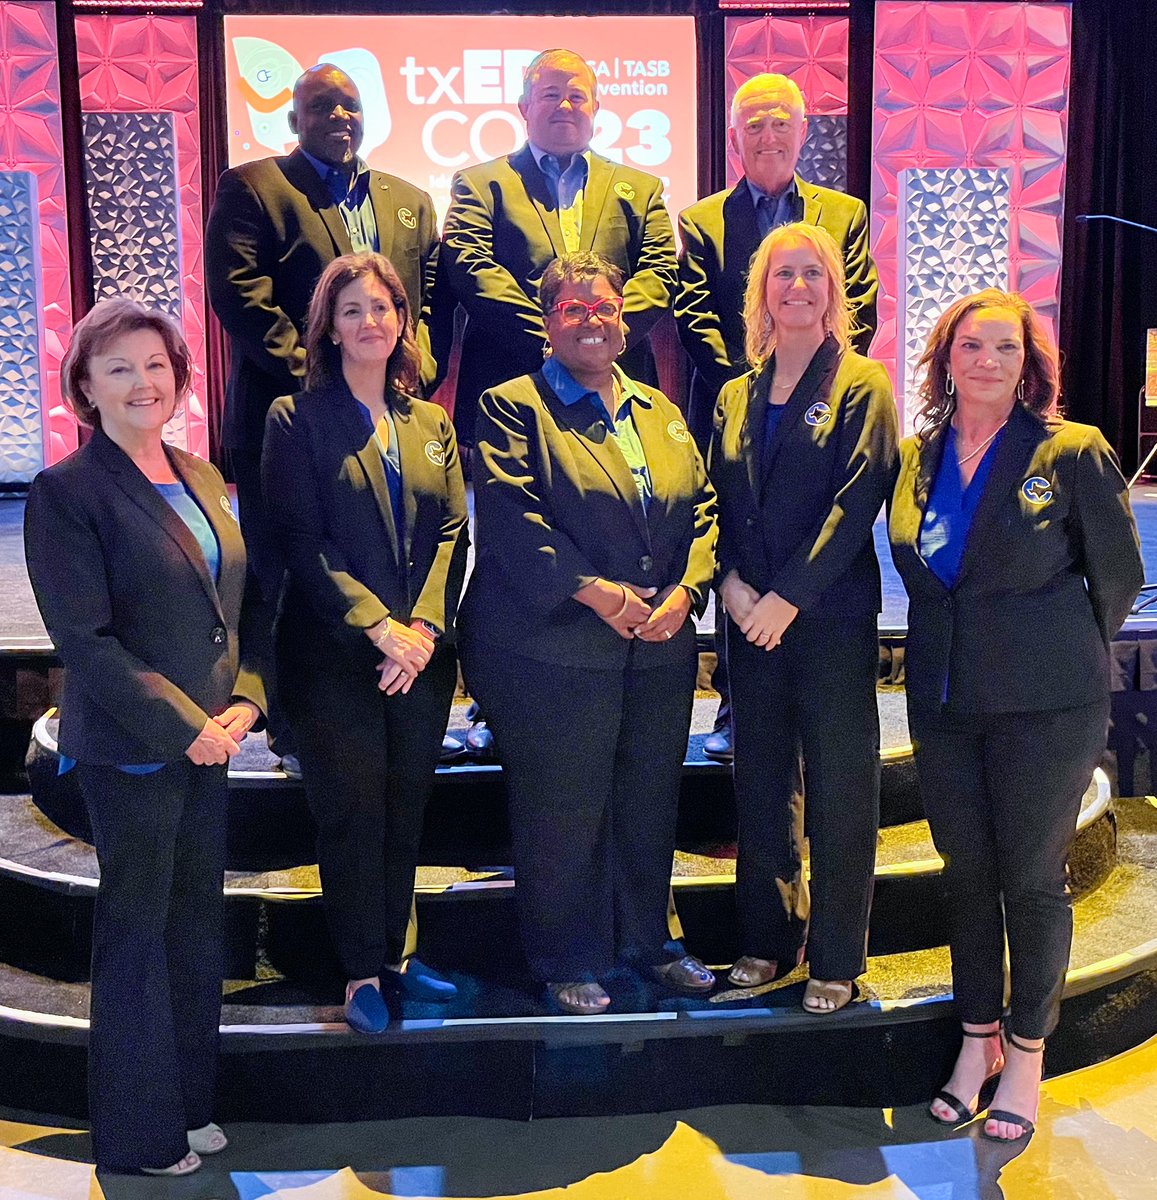 Tops in Texas! Congratulations to the Corsicana ISD Board of Trustees, this year’s Texas Association of School Administrators state Board of the Year! The win was announced this morning at txEDCON23 in Dallas. We are proud of our Board of Trustees! #TCC